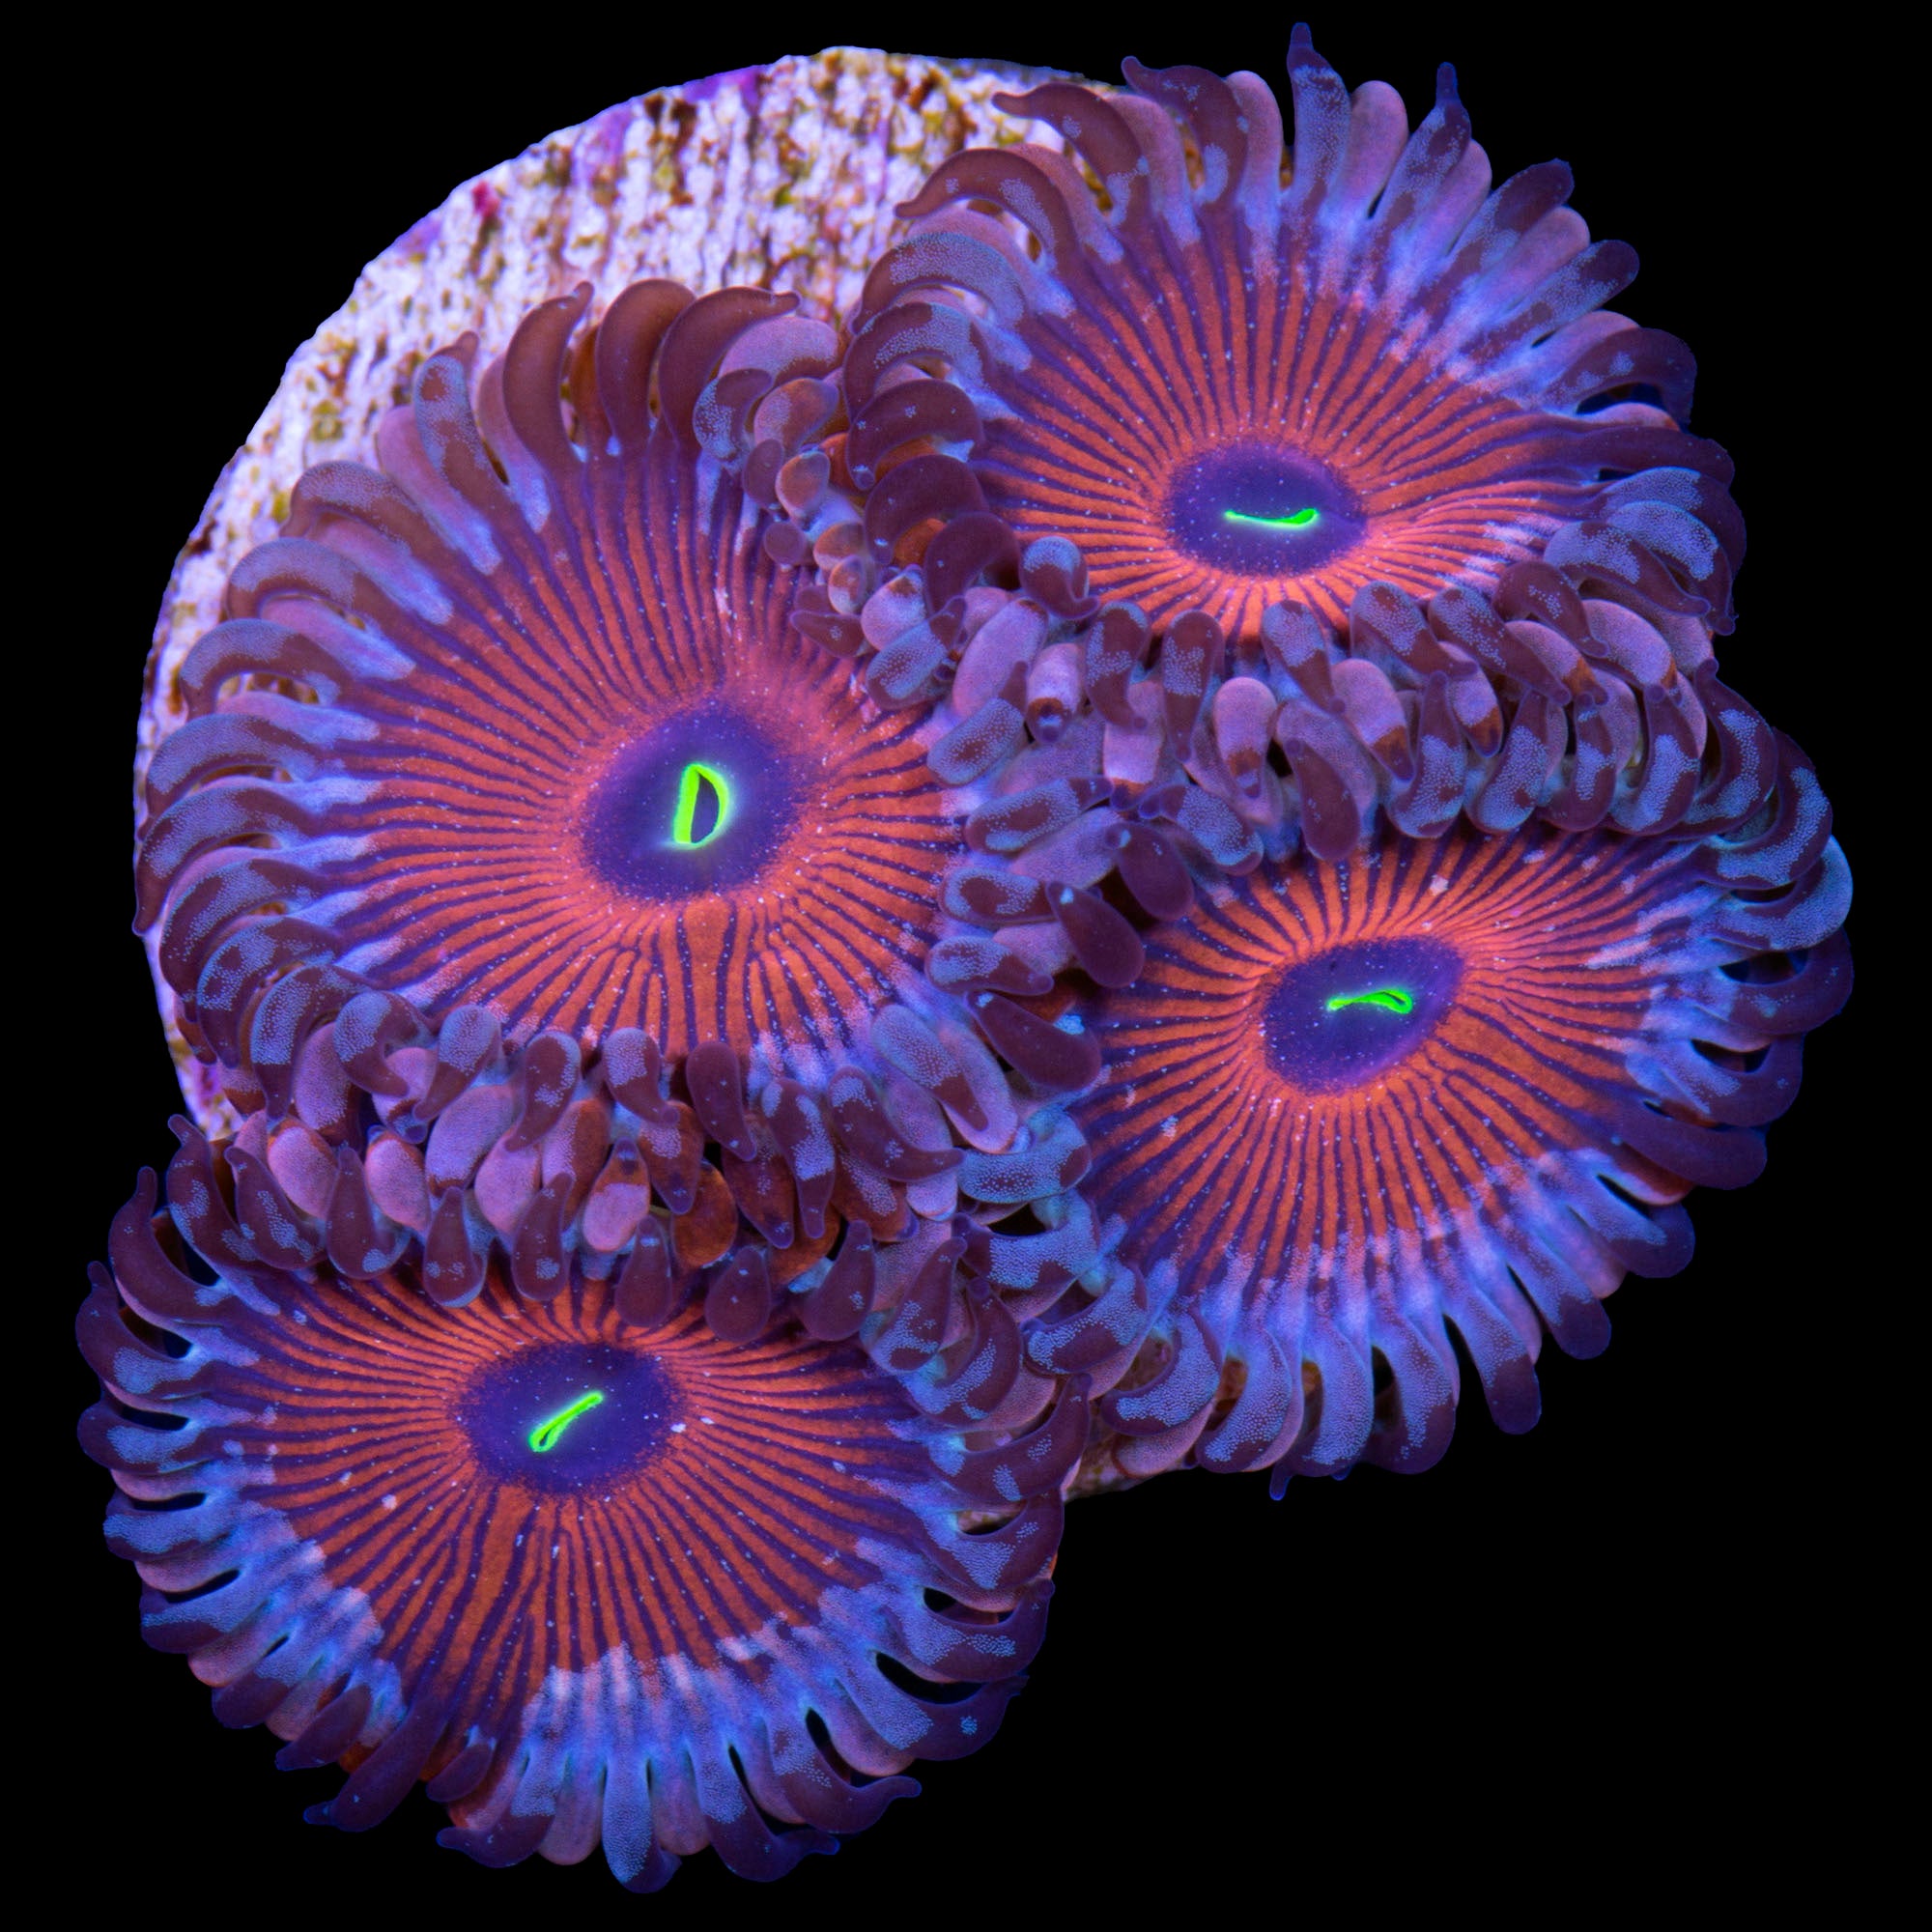 Vivid's Agave Zoanthids